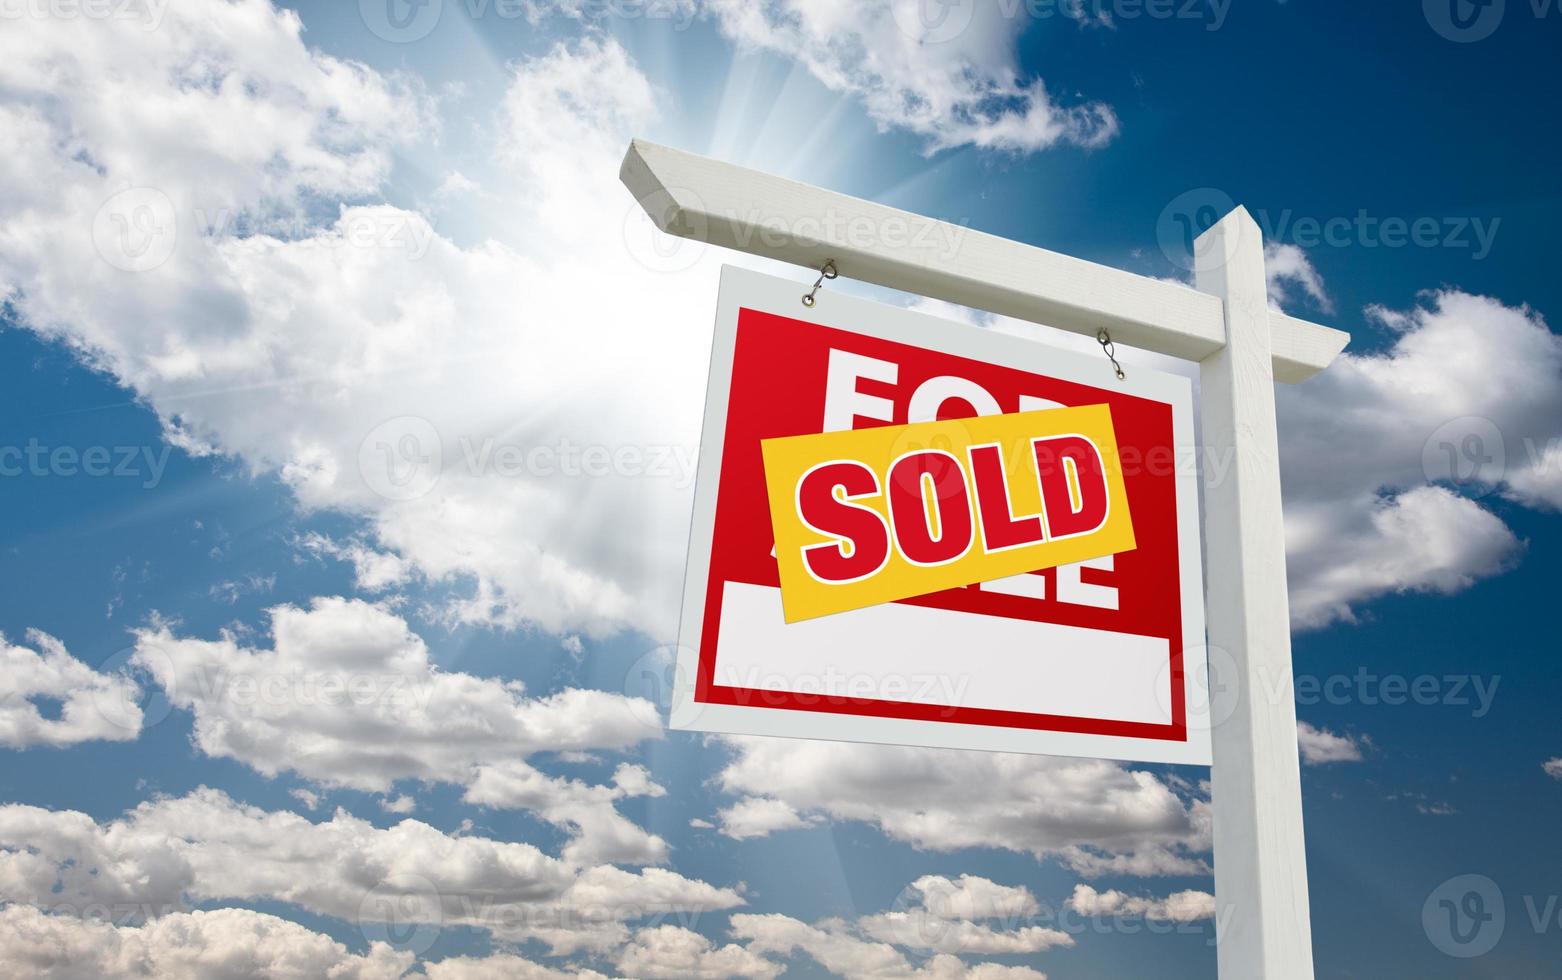 Sold For Sale Real Estate Sign over Clouds and Blue Sky photo